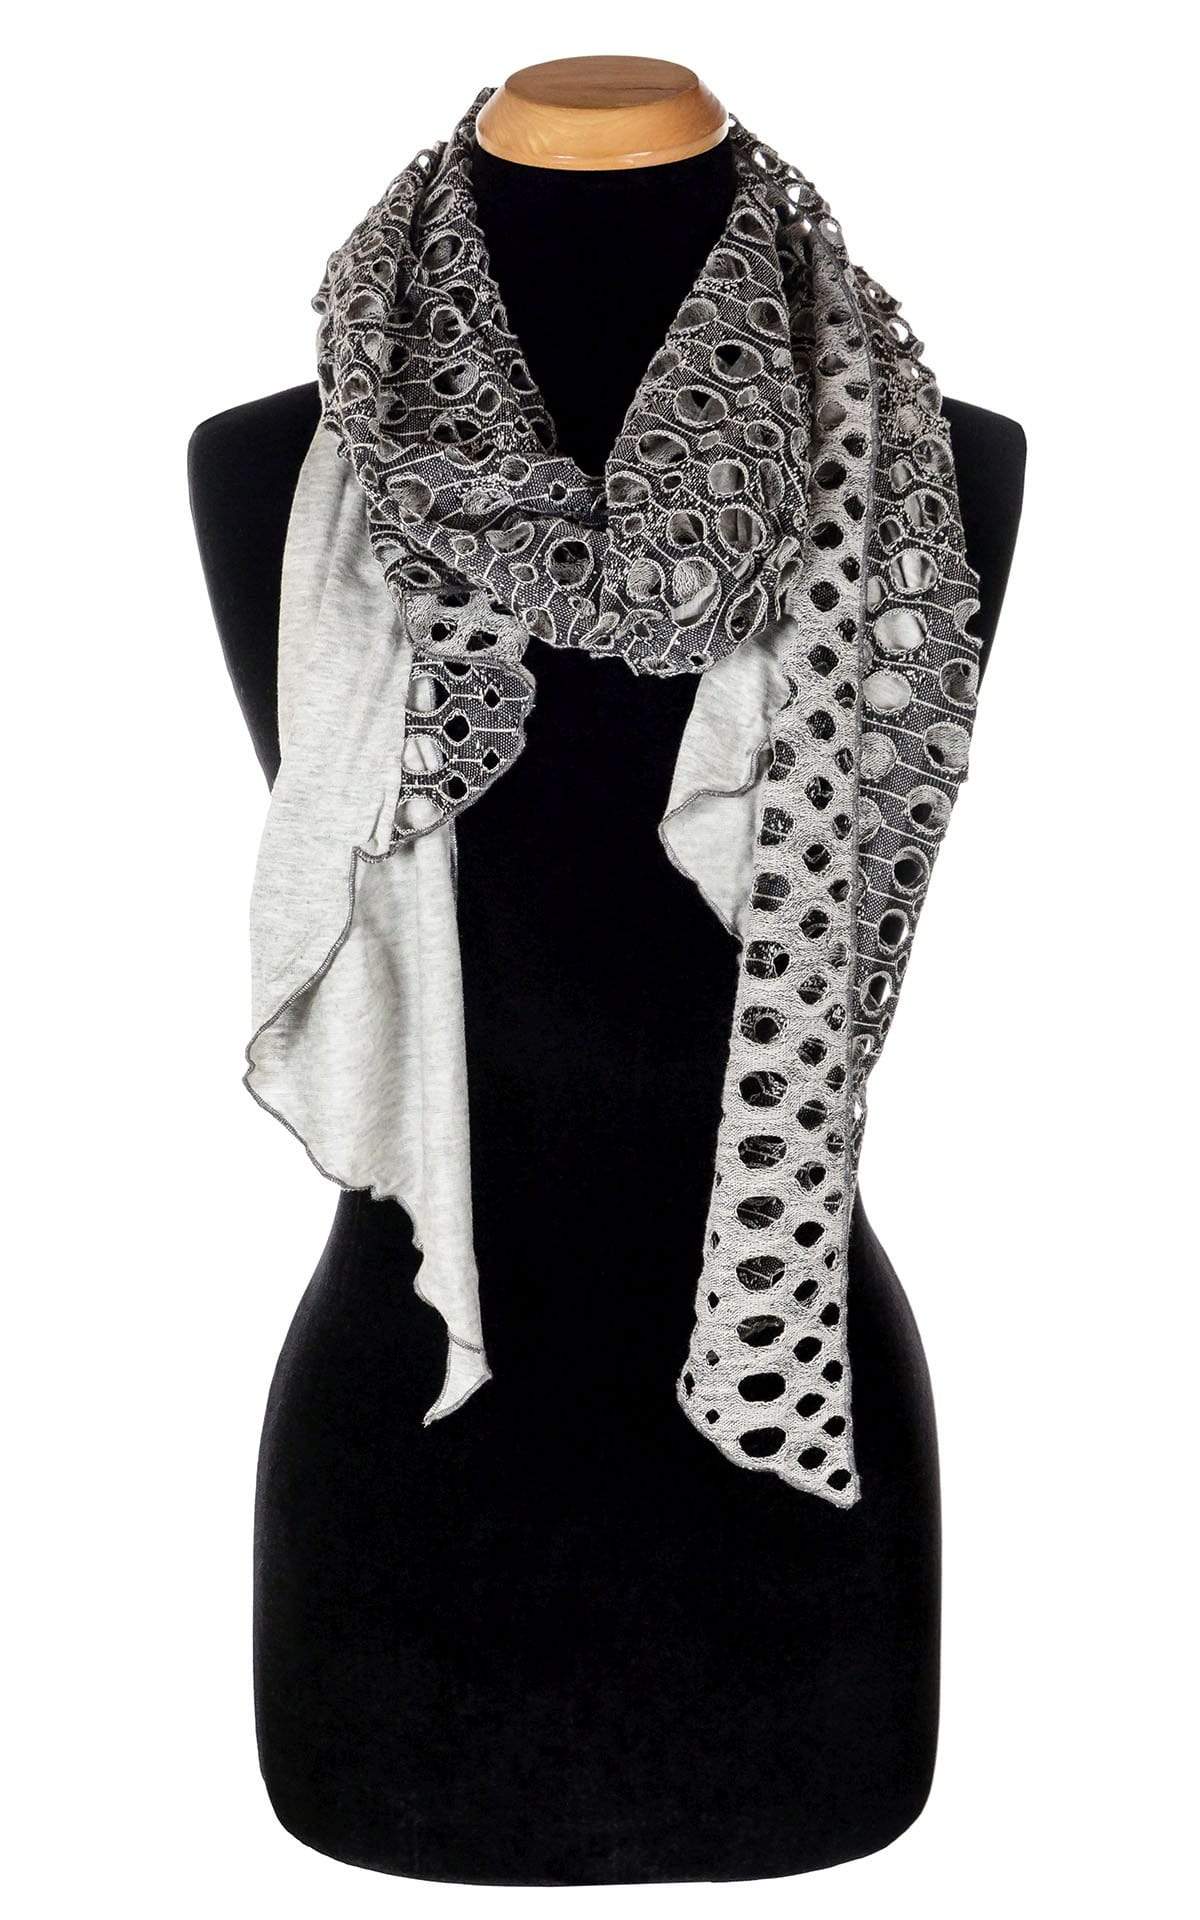 Ladies Two-Tone Handkerchief Scarf on Mannequin | Lunar Landing, a black and neutral knit with curled edges surrounding holes, paired with a light-weight Silver Gray Jersey Knit | Handmade in Seattle WA | Pandemonium Millinery